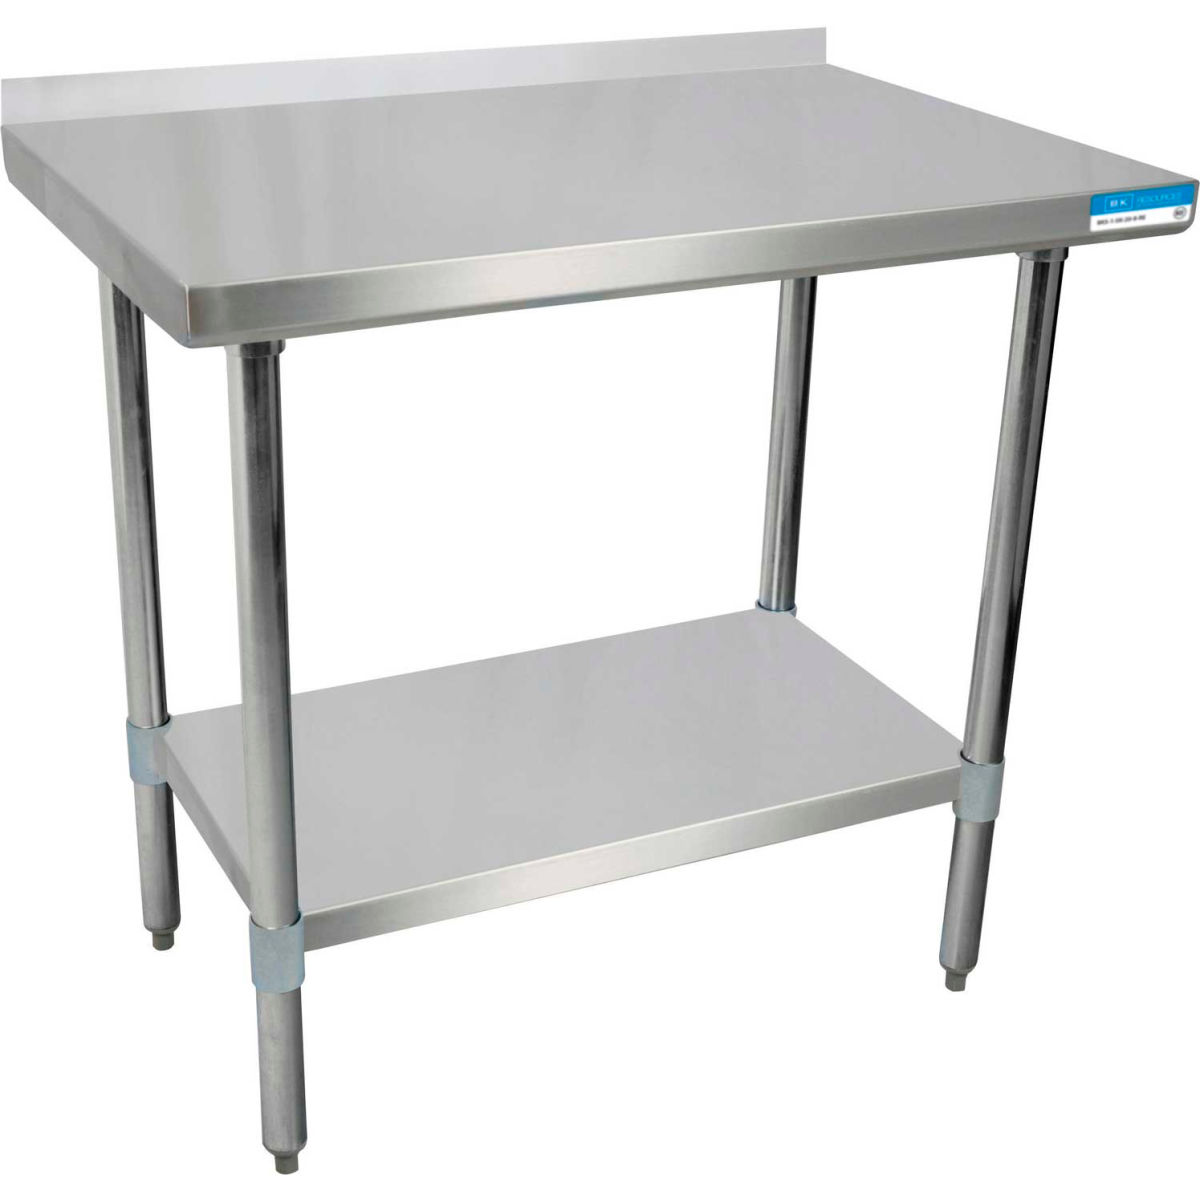 Picture of BK Resources B1516239 18 Gauge 430 Series Stainless Workbench with Undershelf & 1.5 in. Backsplash - 24 x 18 in.